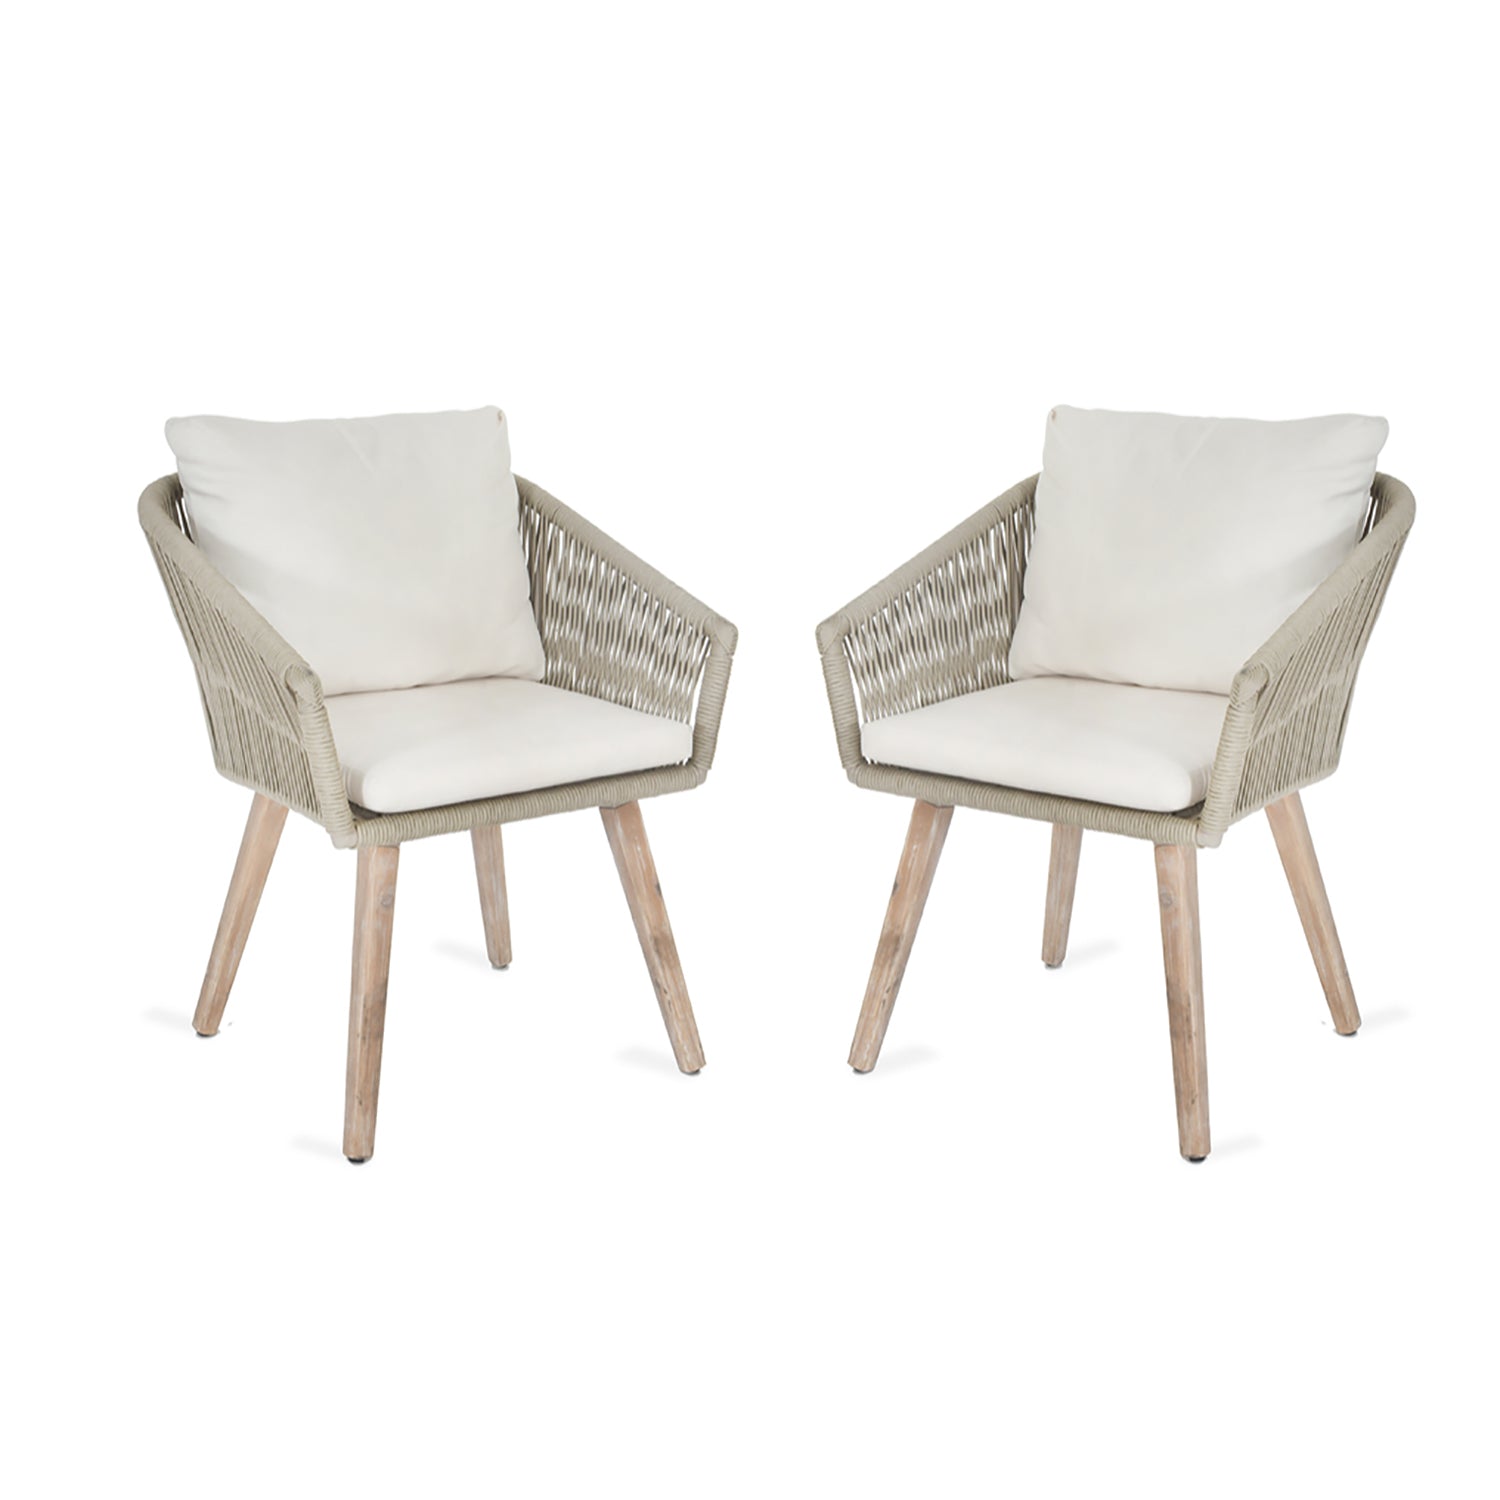 Pair of Colwell Dining Chairs Polyrope & Acacia by Garden Trading